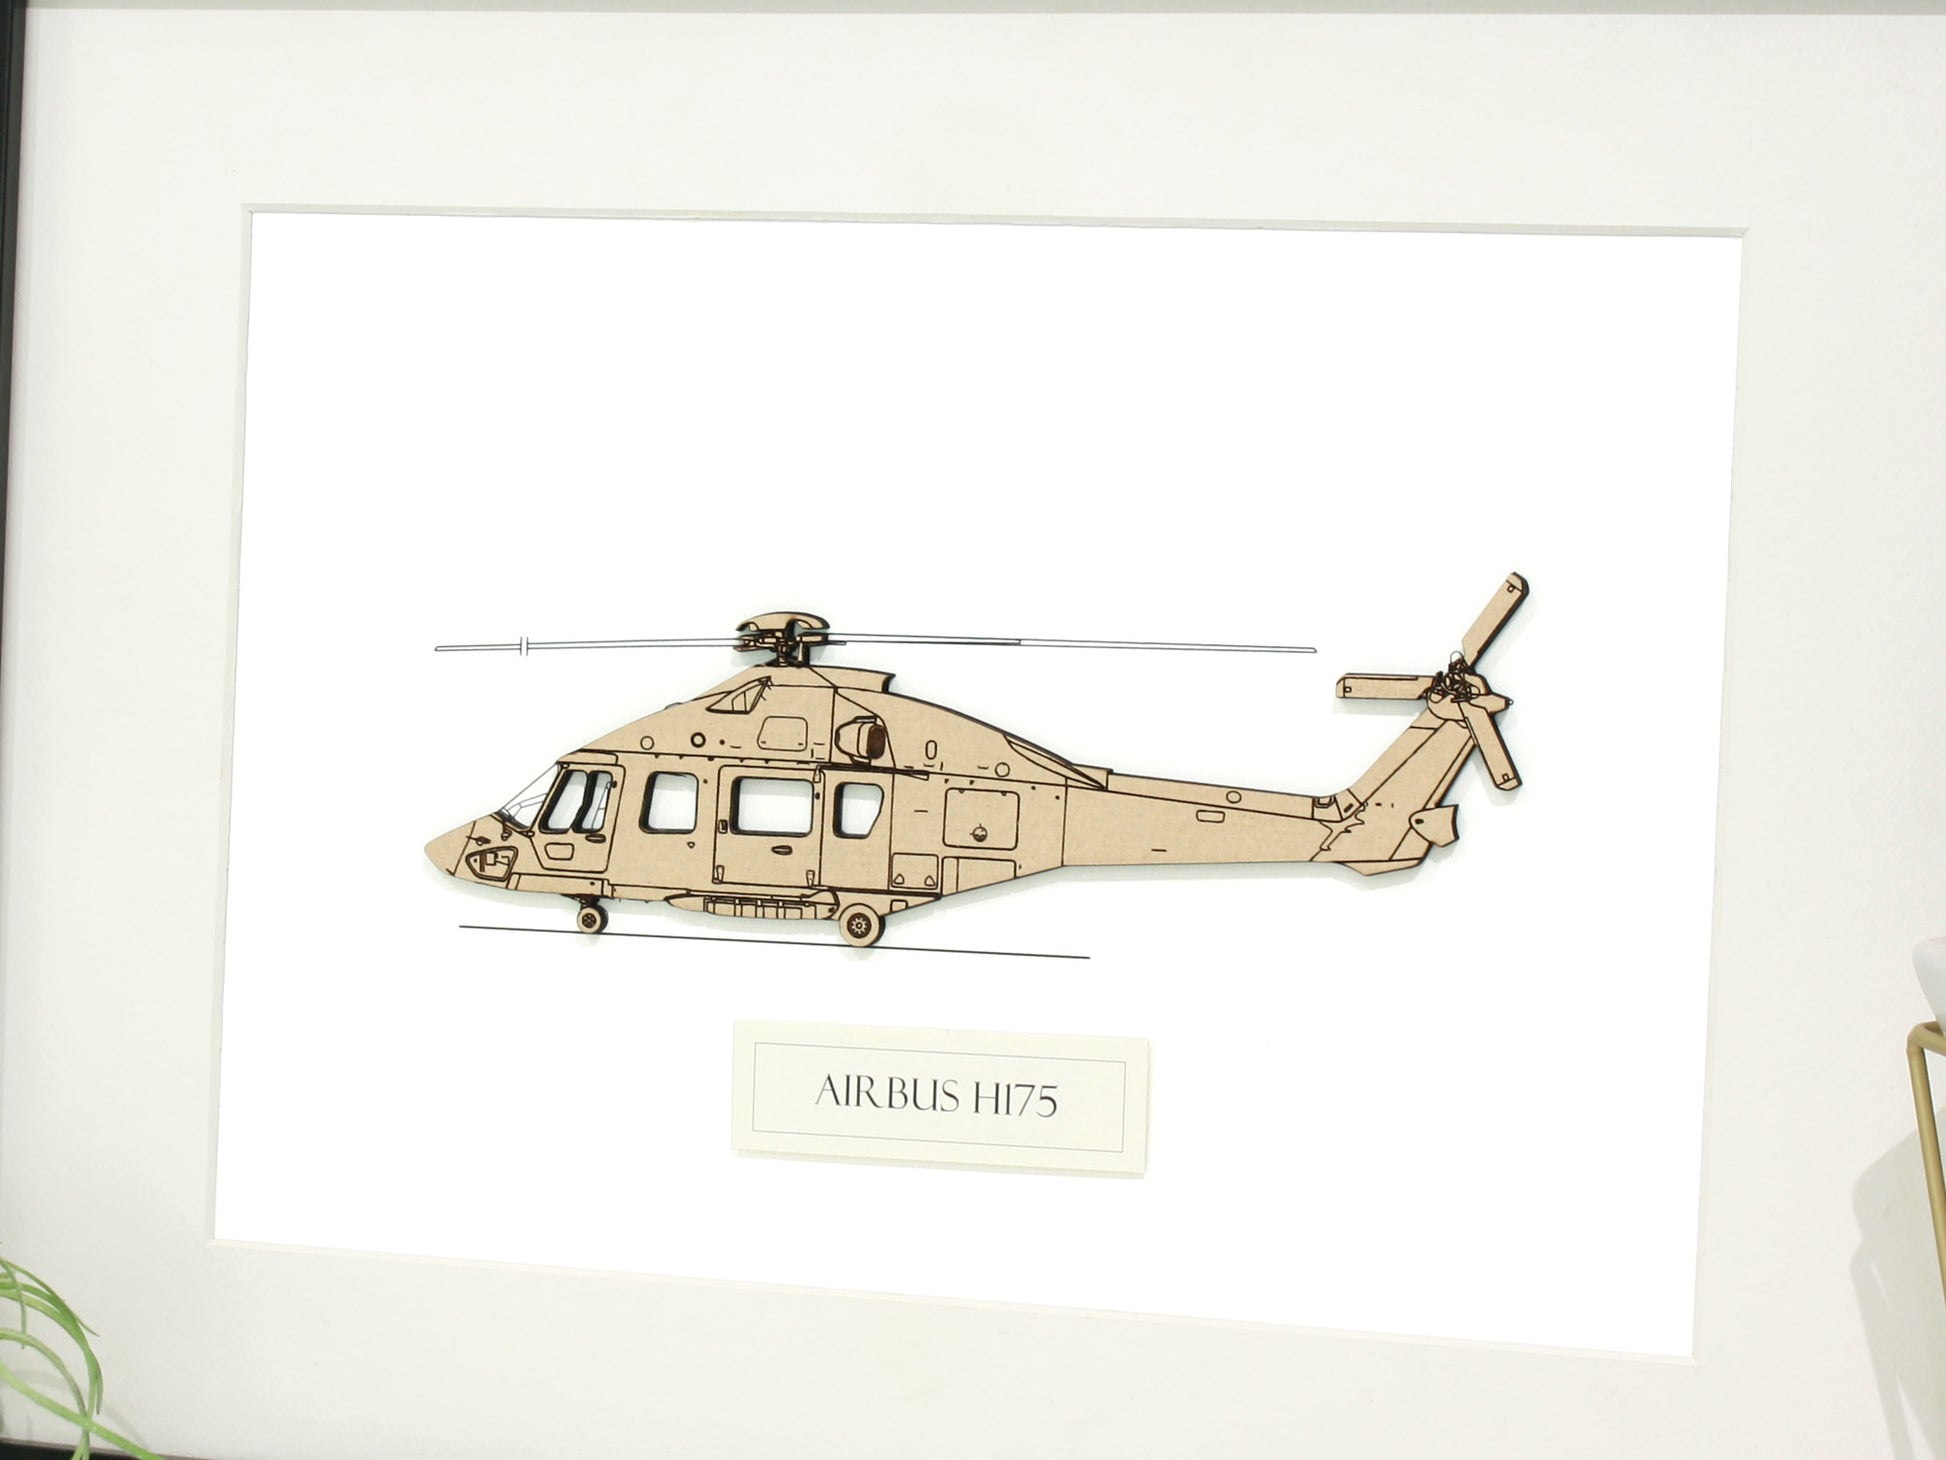 Airbus H175 helicopter blueprint art